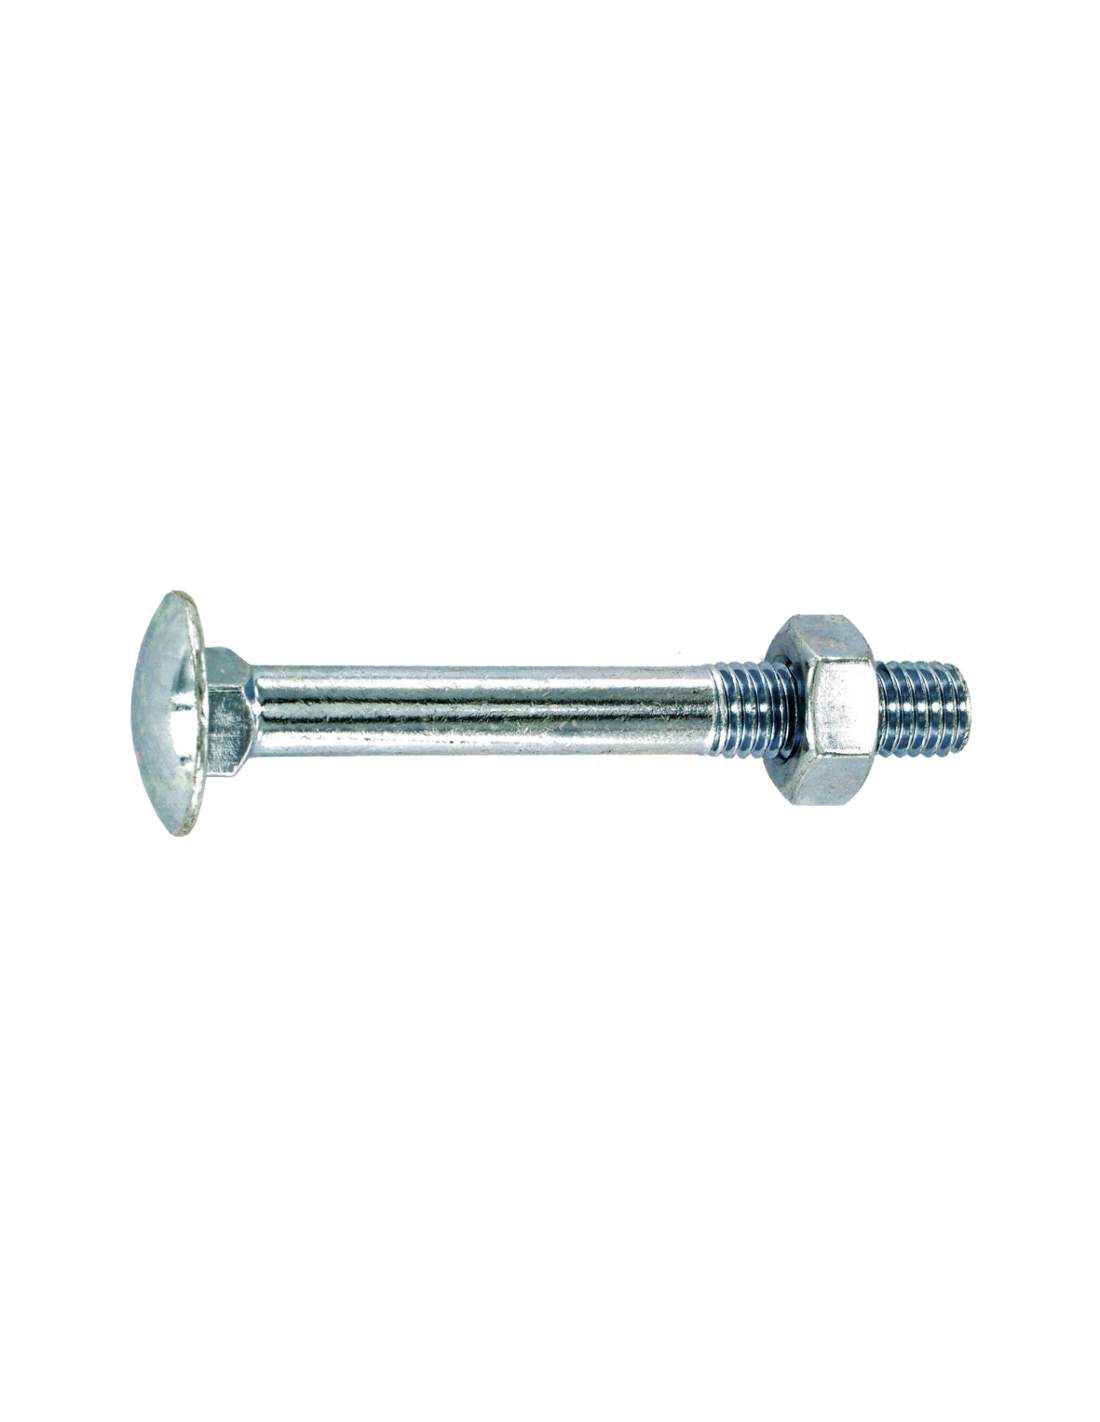 Round-head bolt with square collar in galvanized steel 6x80mm, 5 pcs.